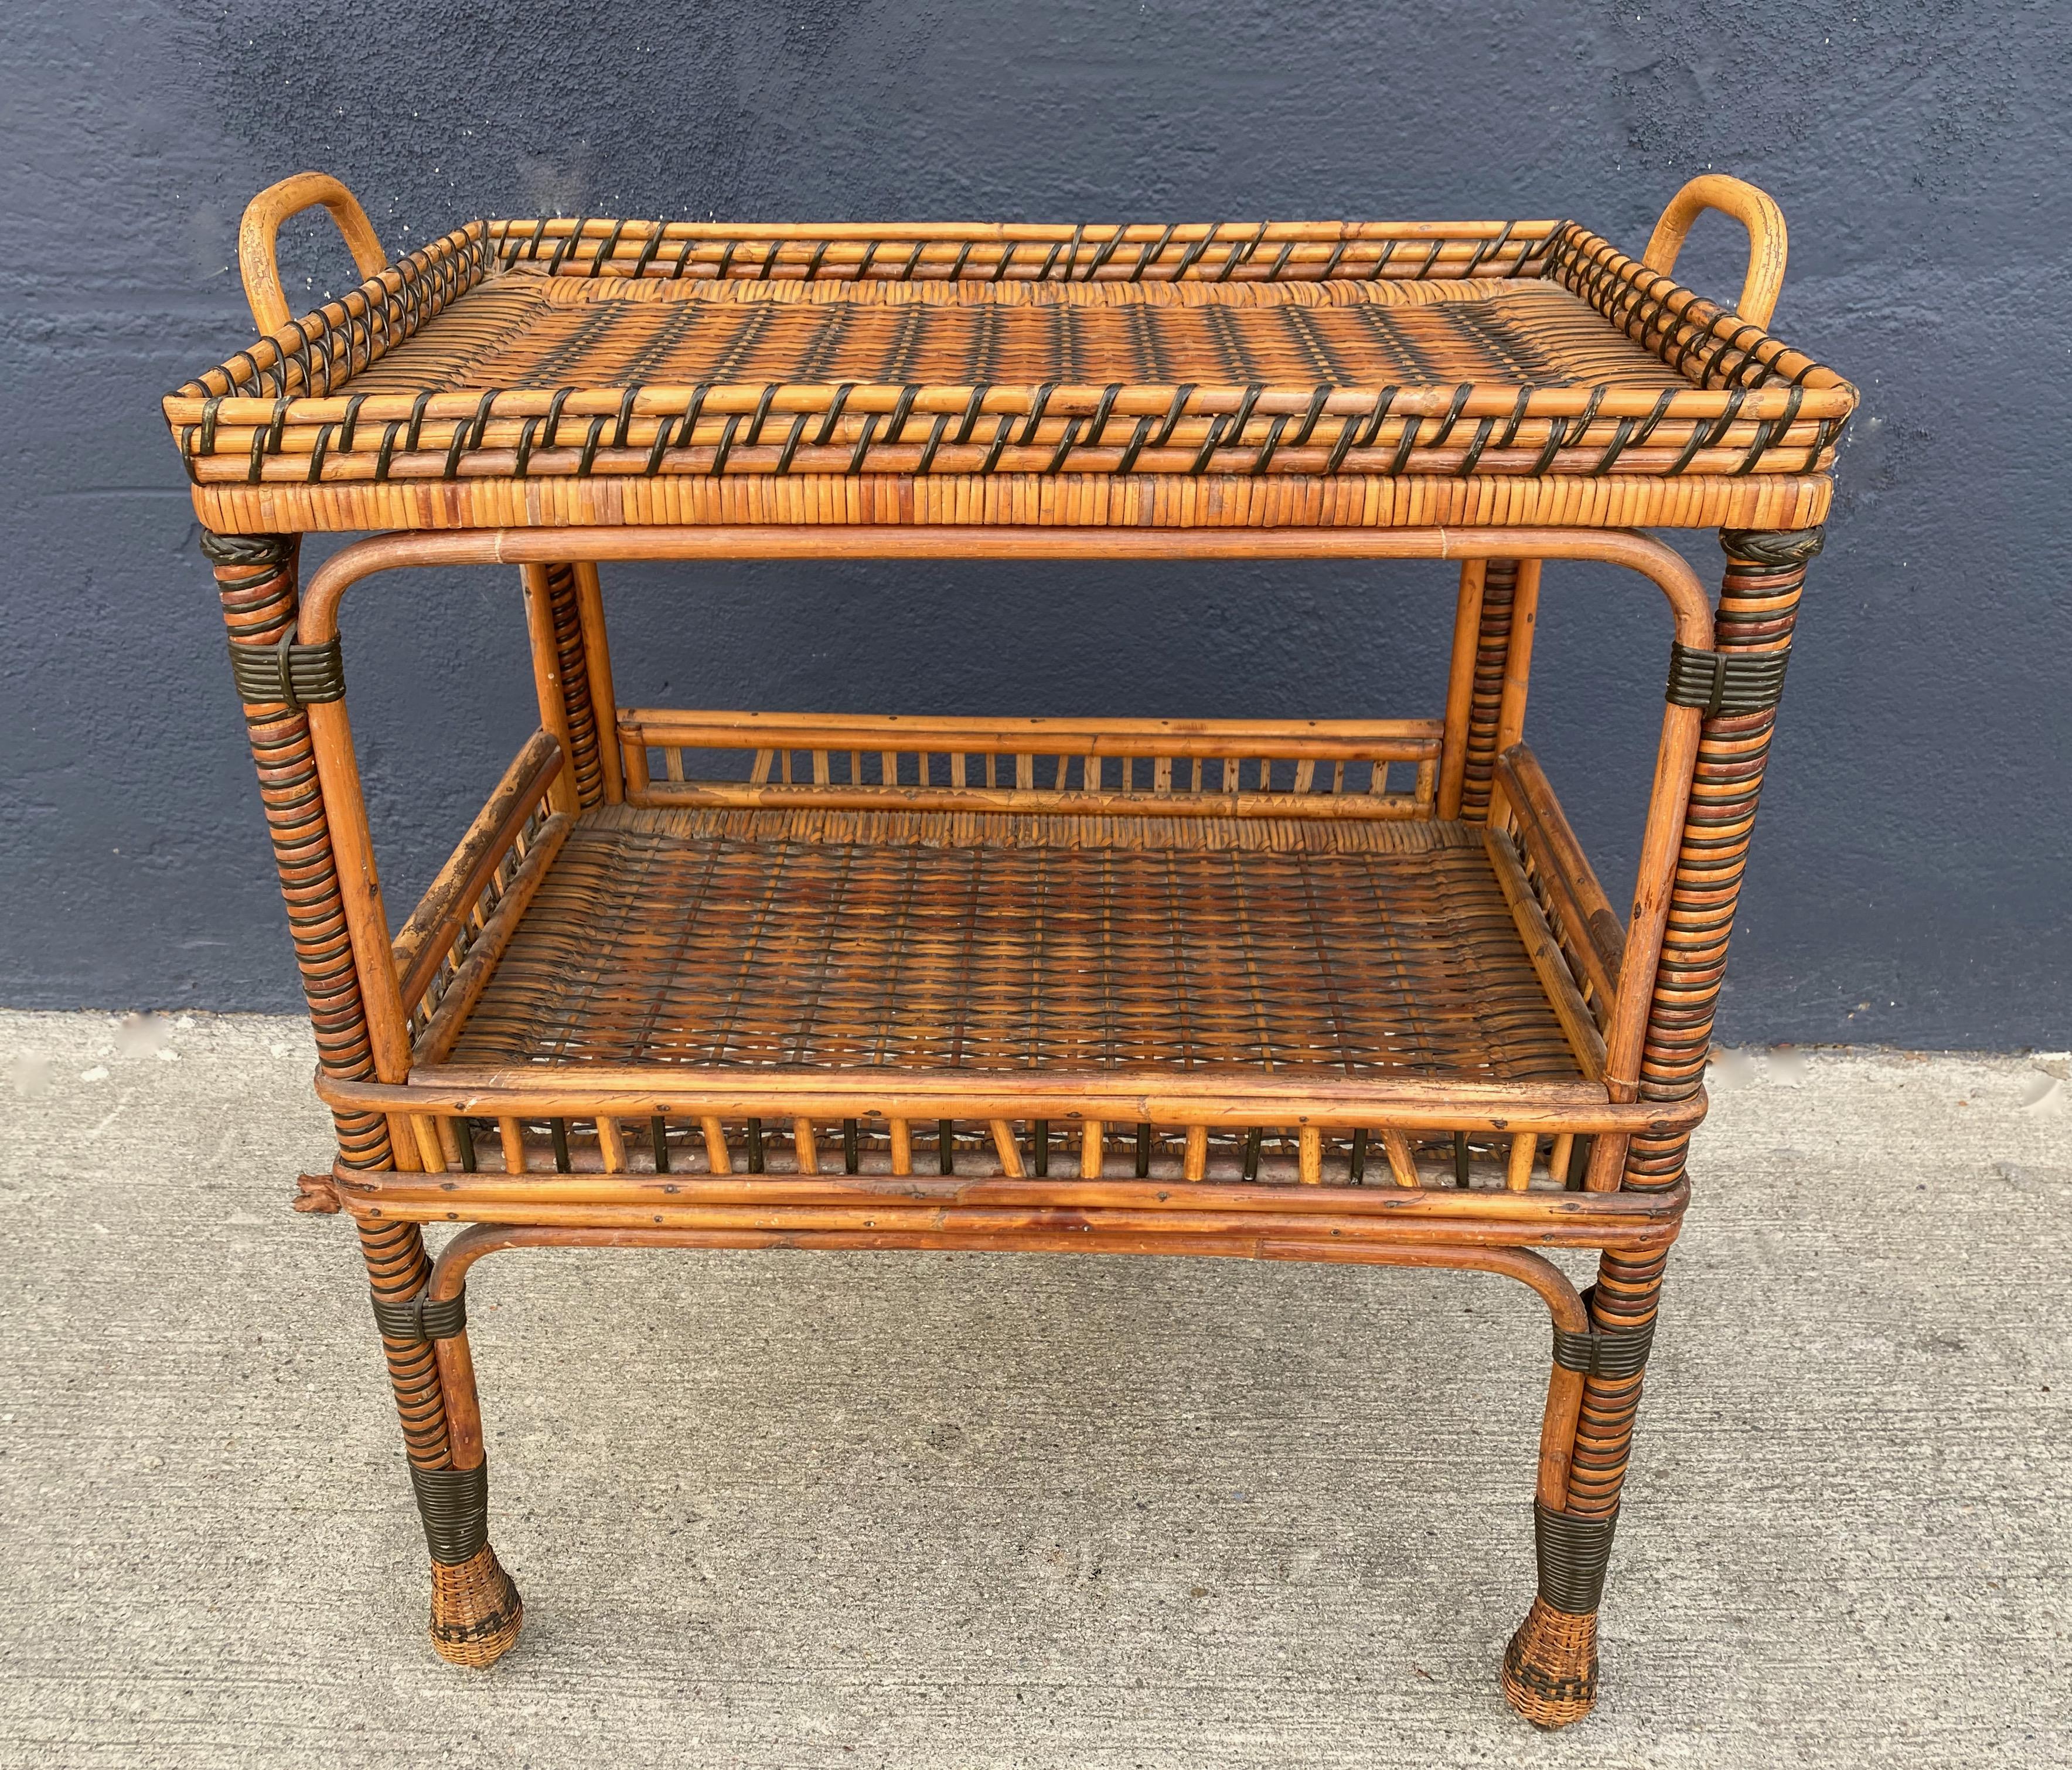 Hand-Woven French Woven Rattan Side Table, c. 1930-1940